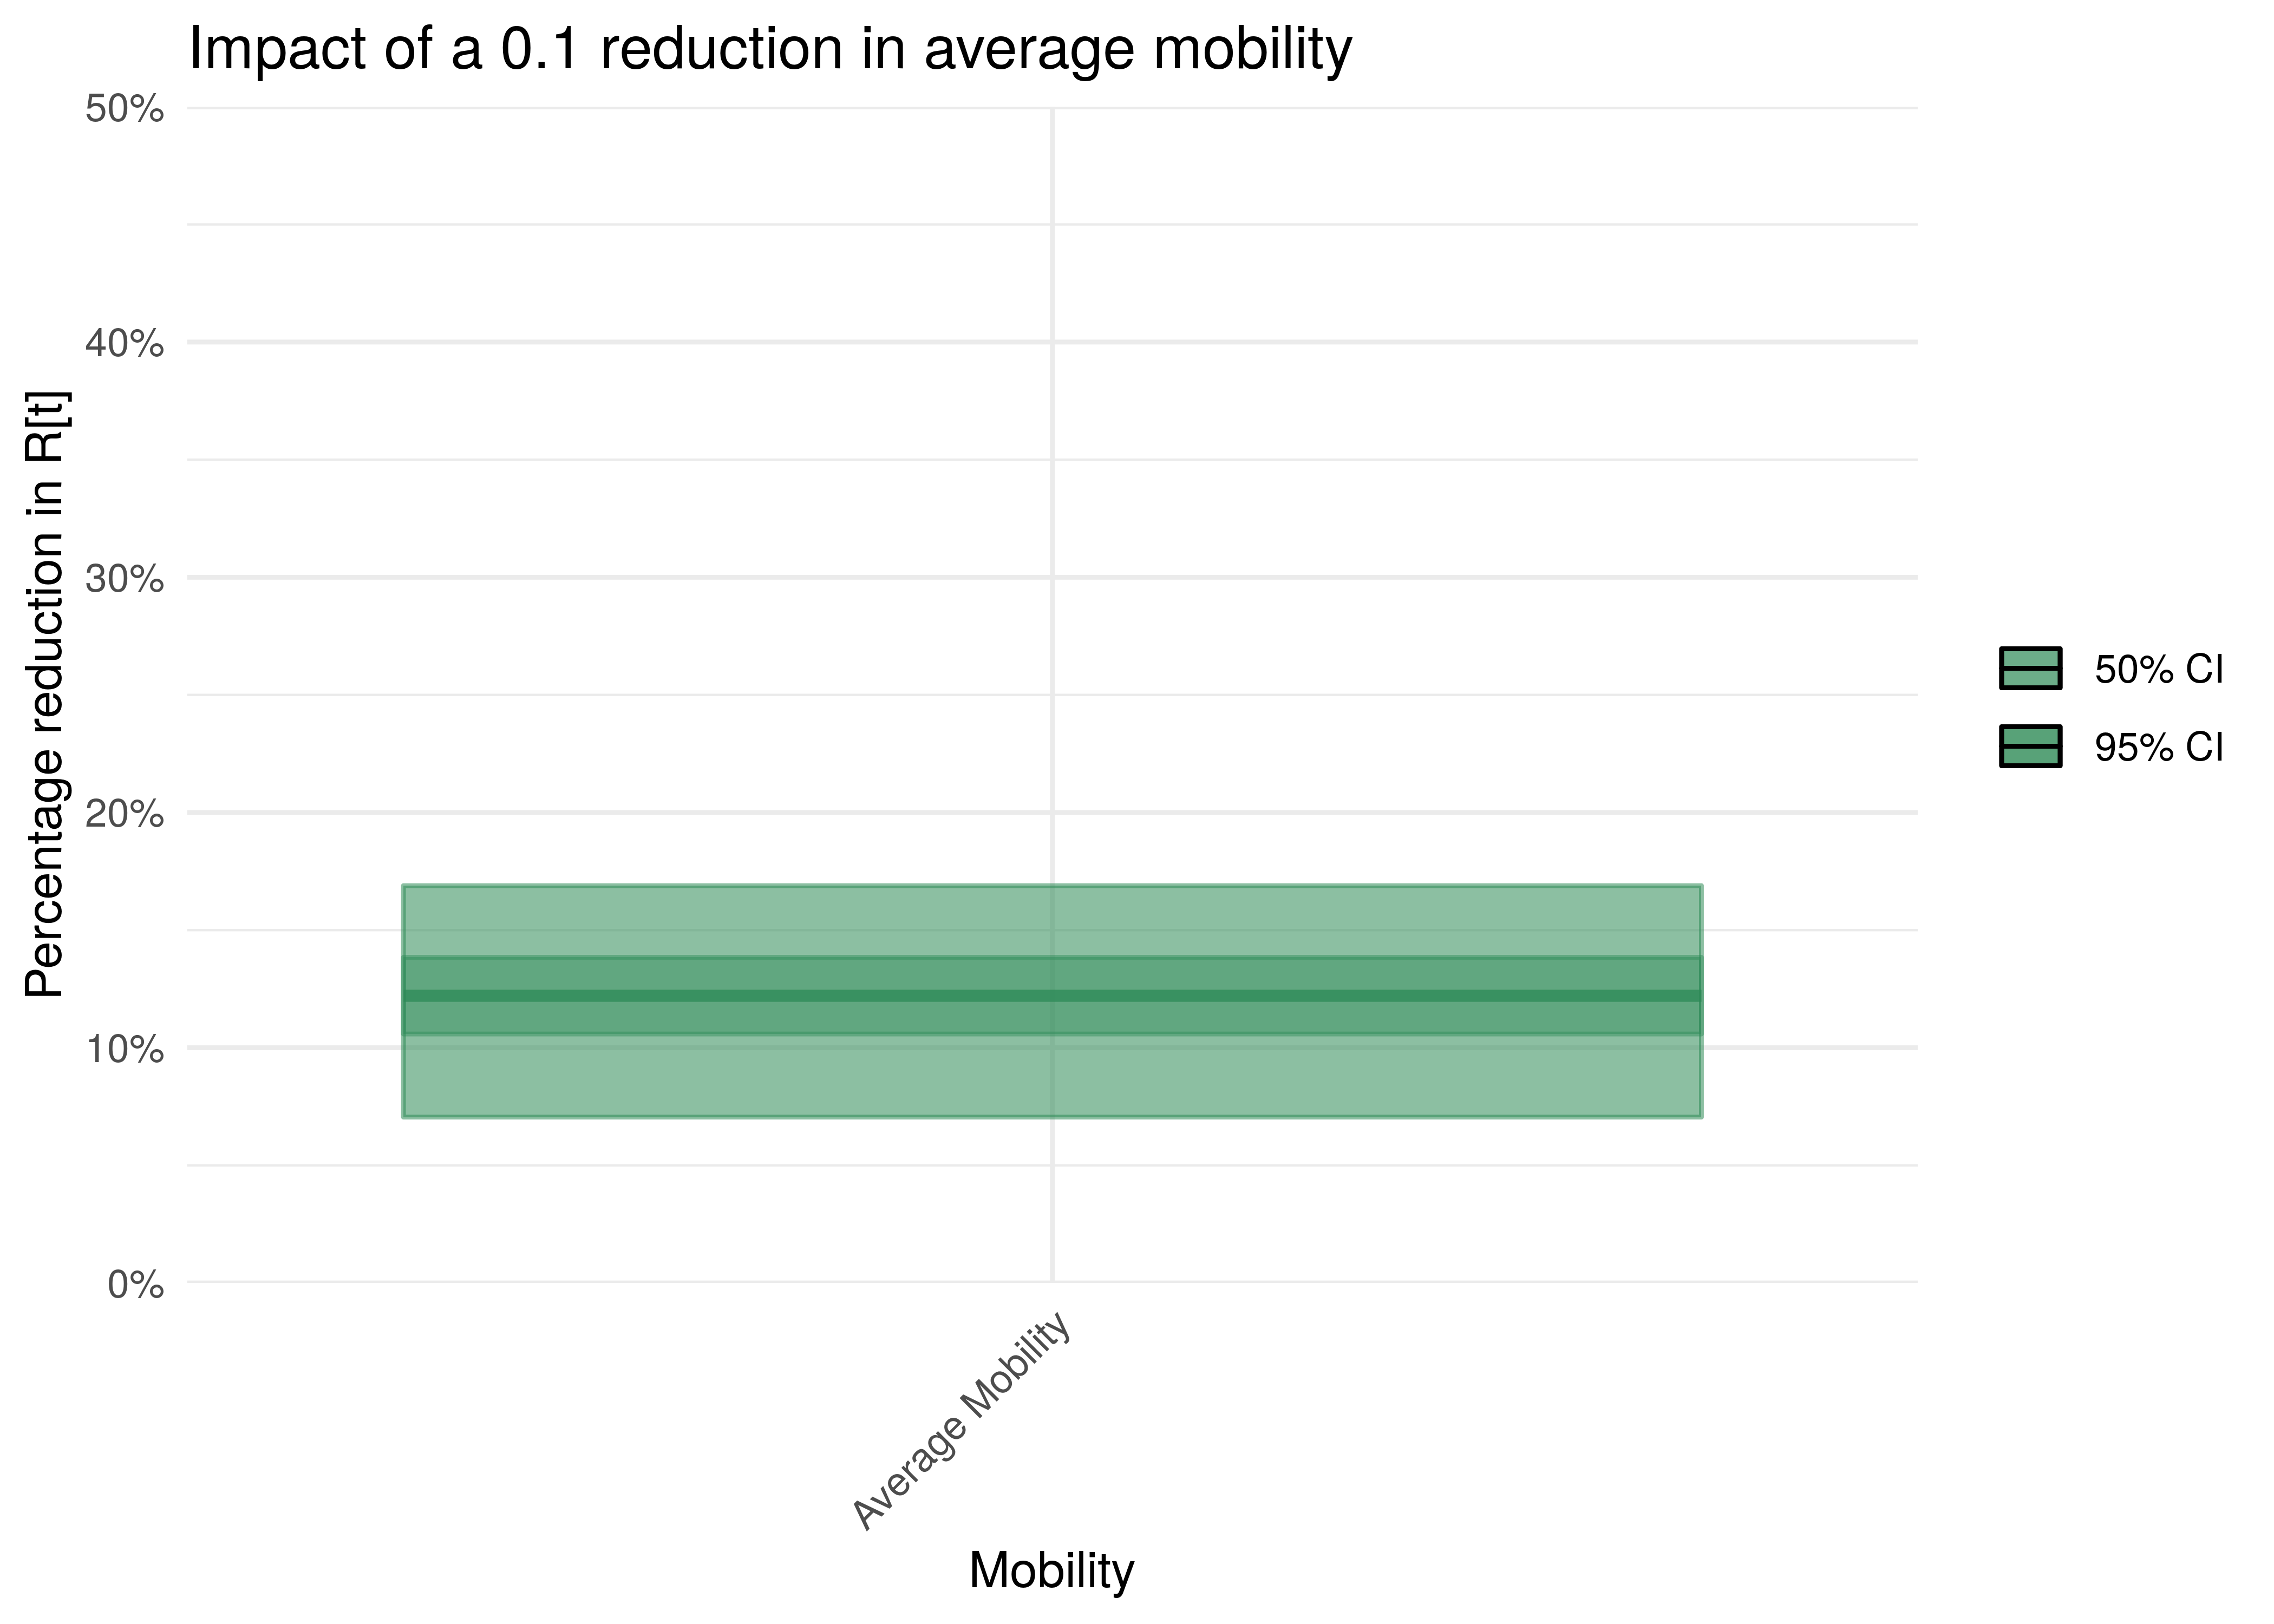 Impact of 0.1 reduction in mobility